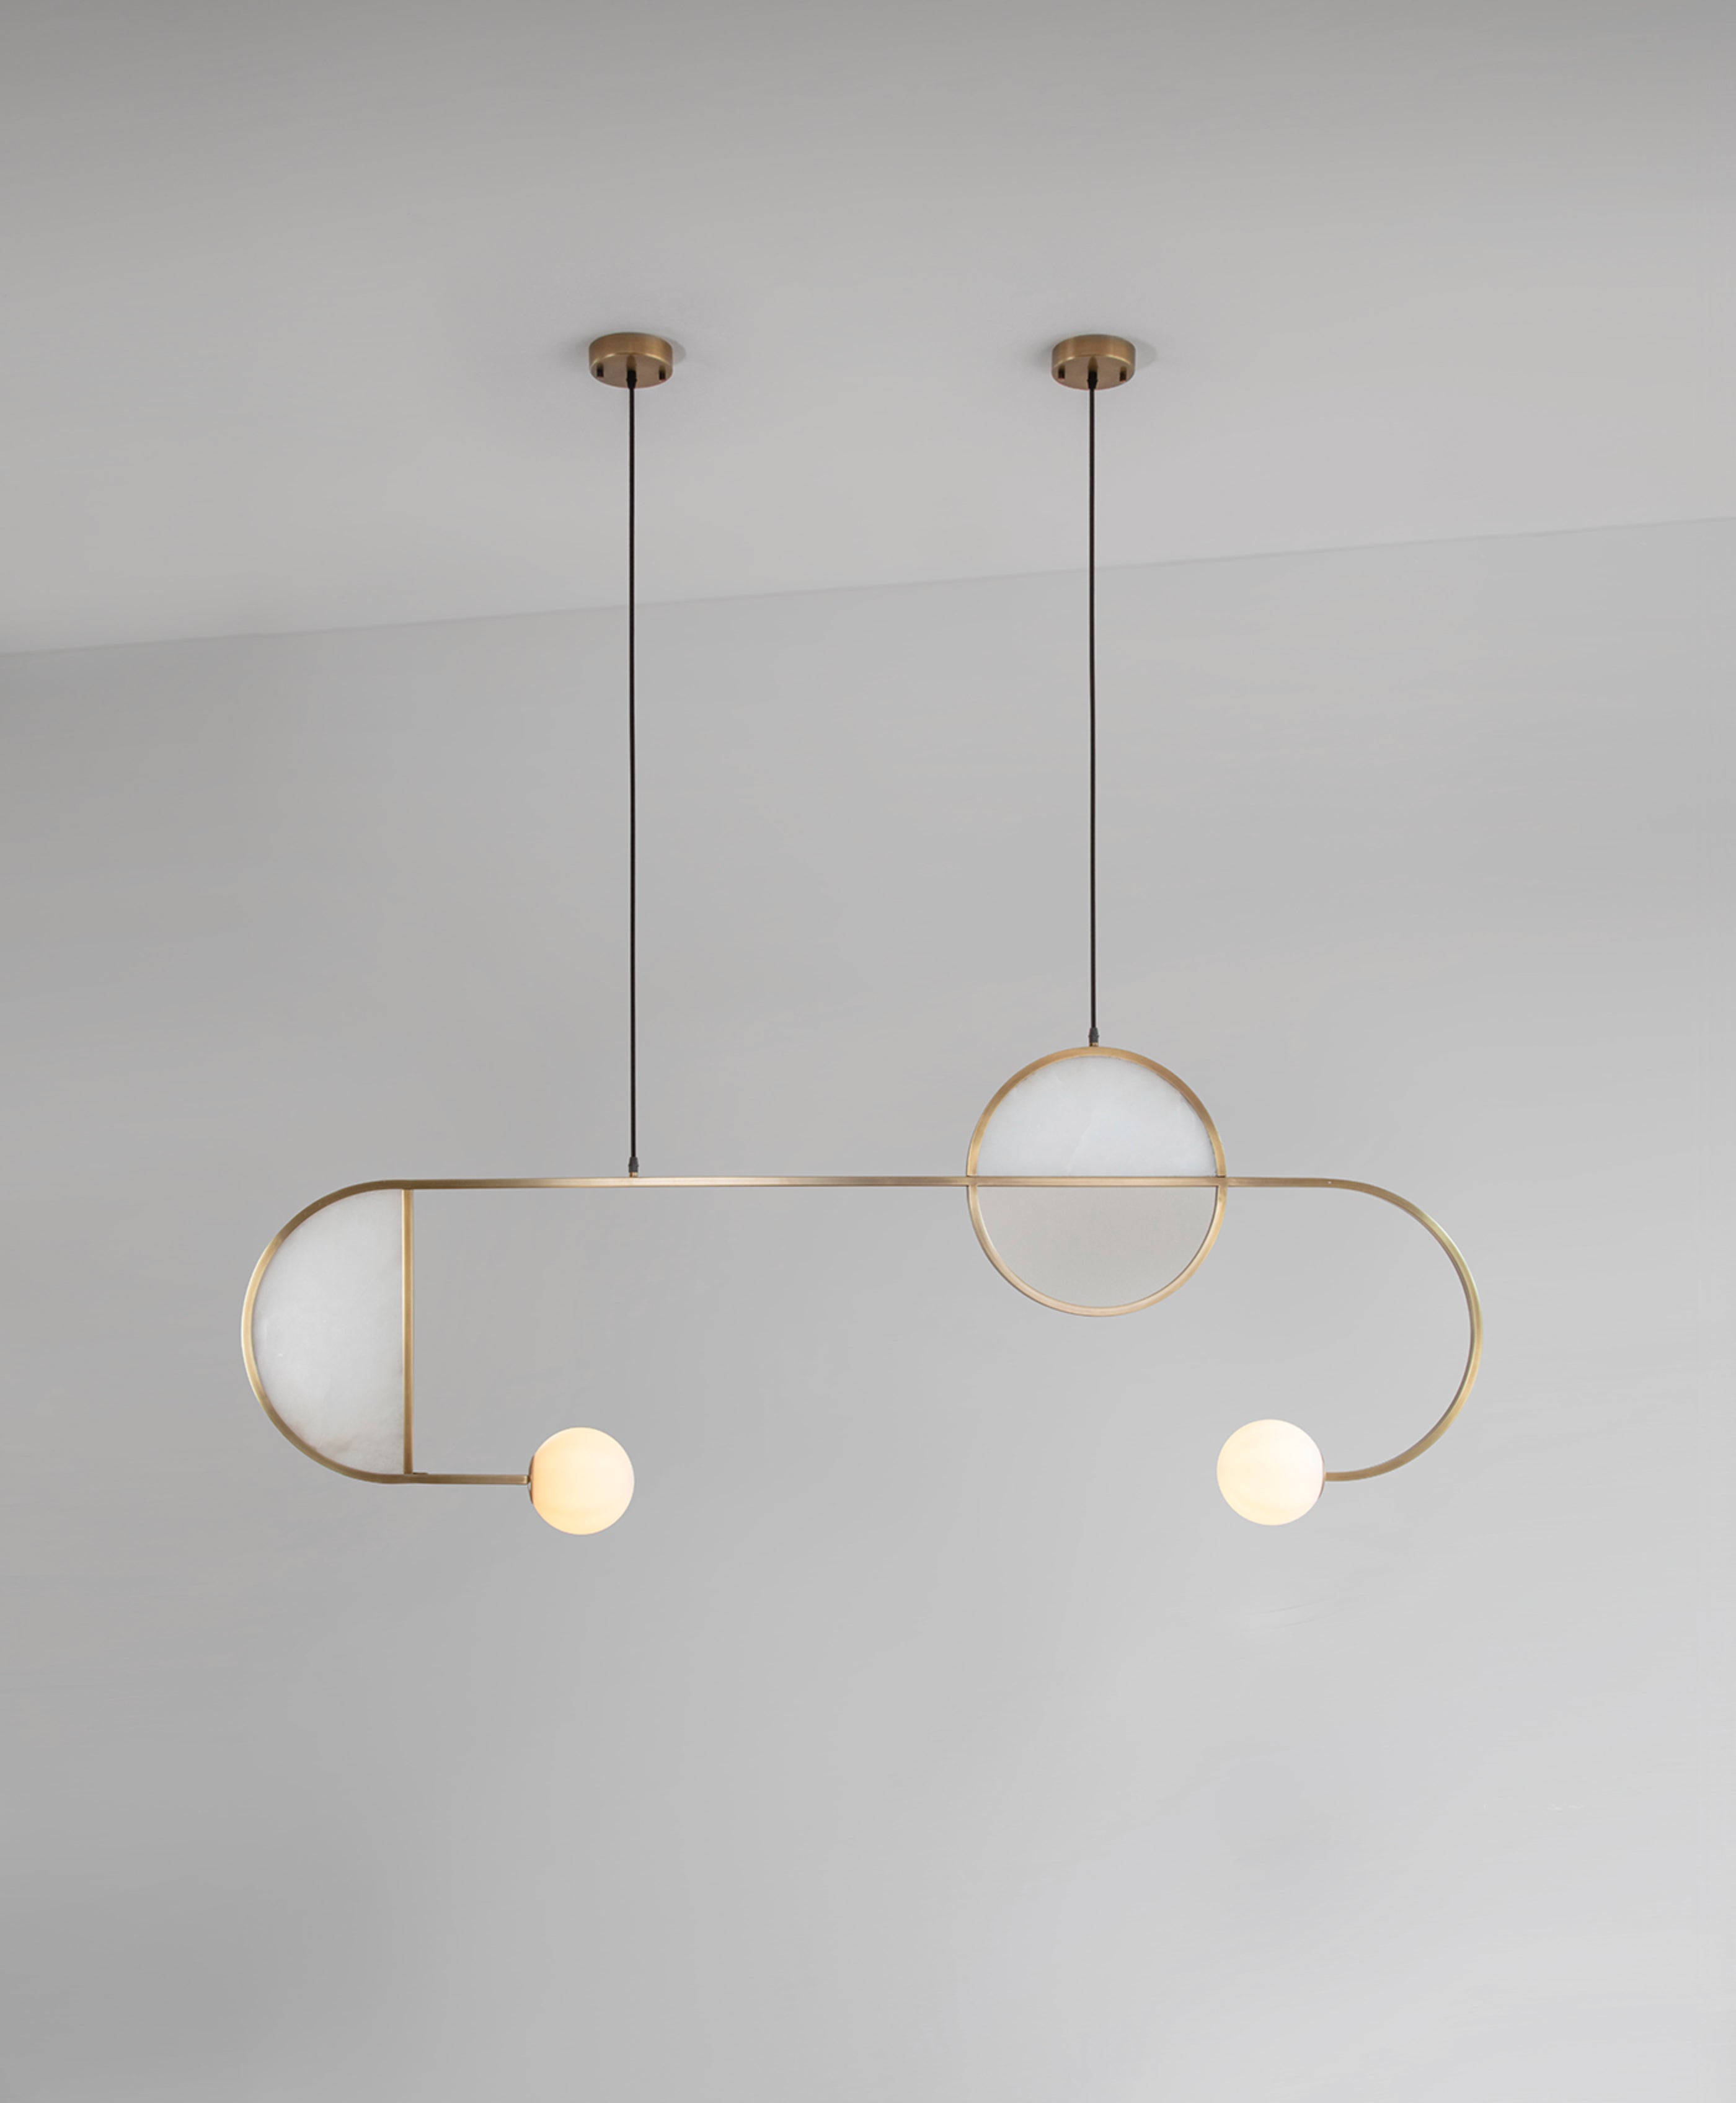 Cutting Edge Pendant Lamp by Square in Circle